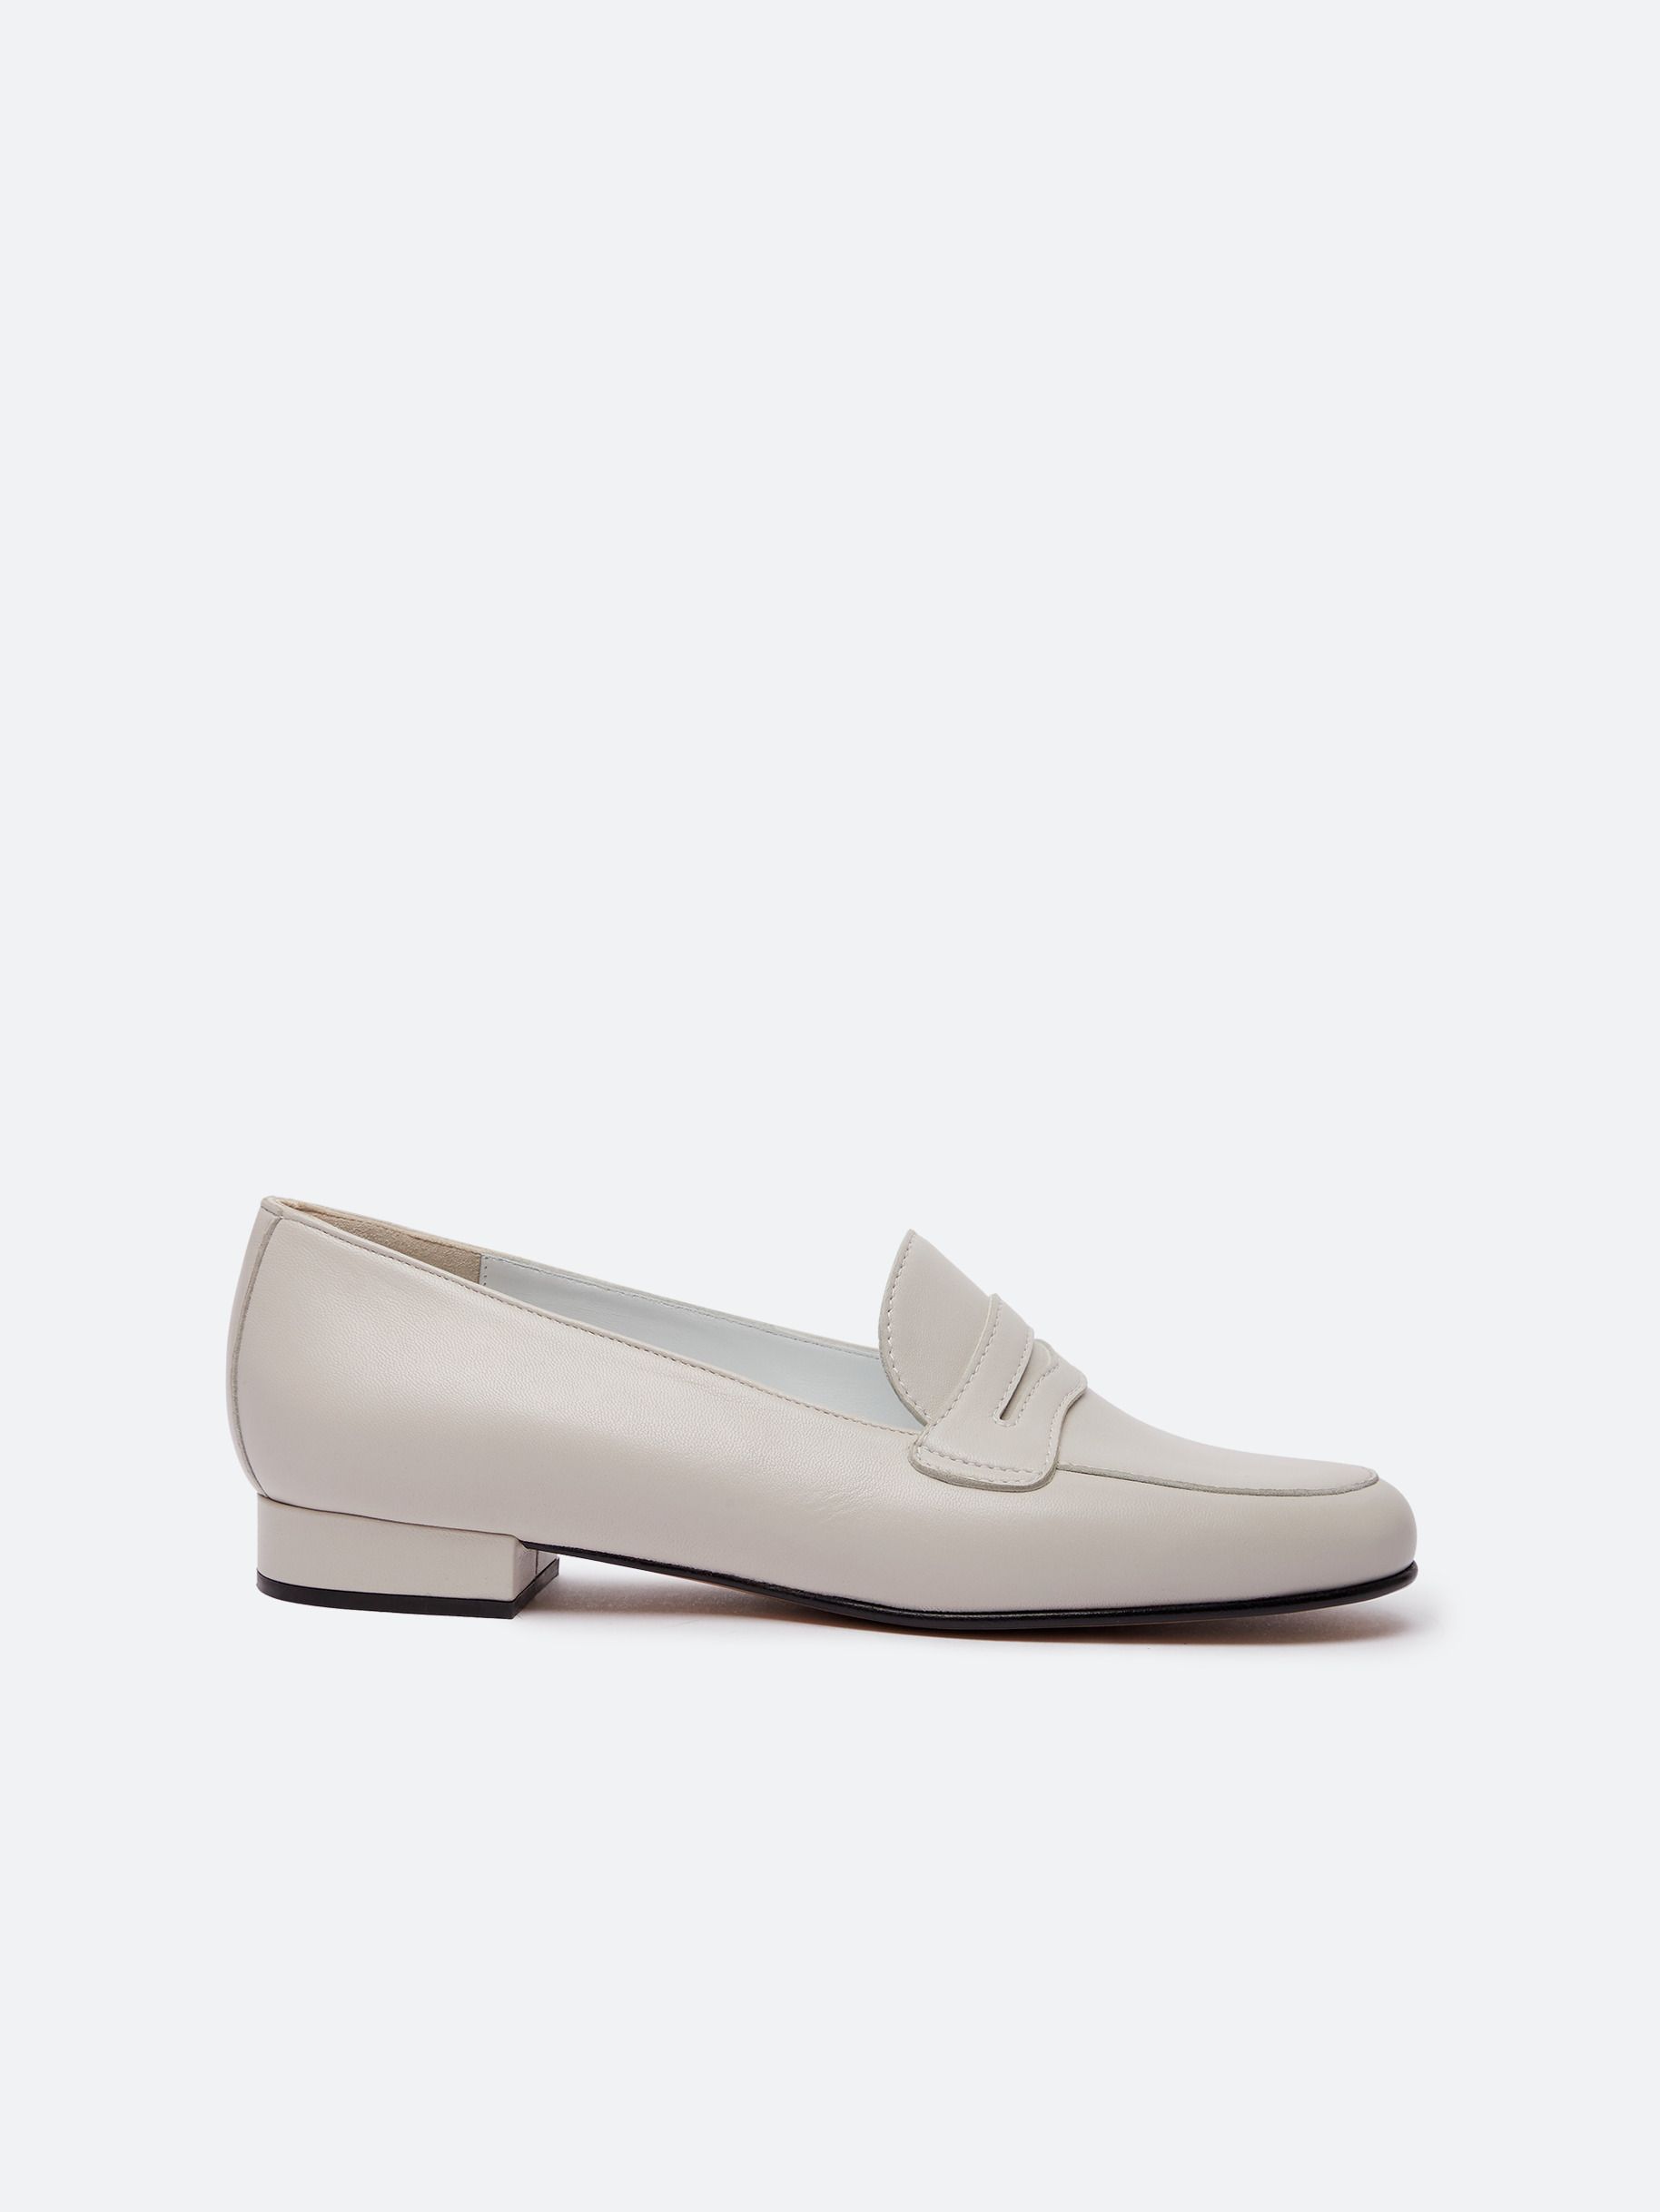 KINA silver leather mary janes | Carel Paris Shoes